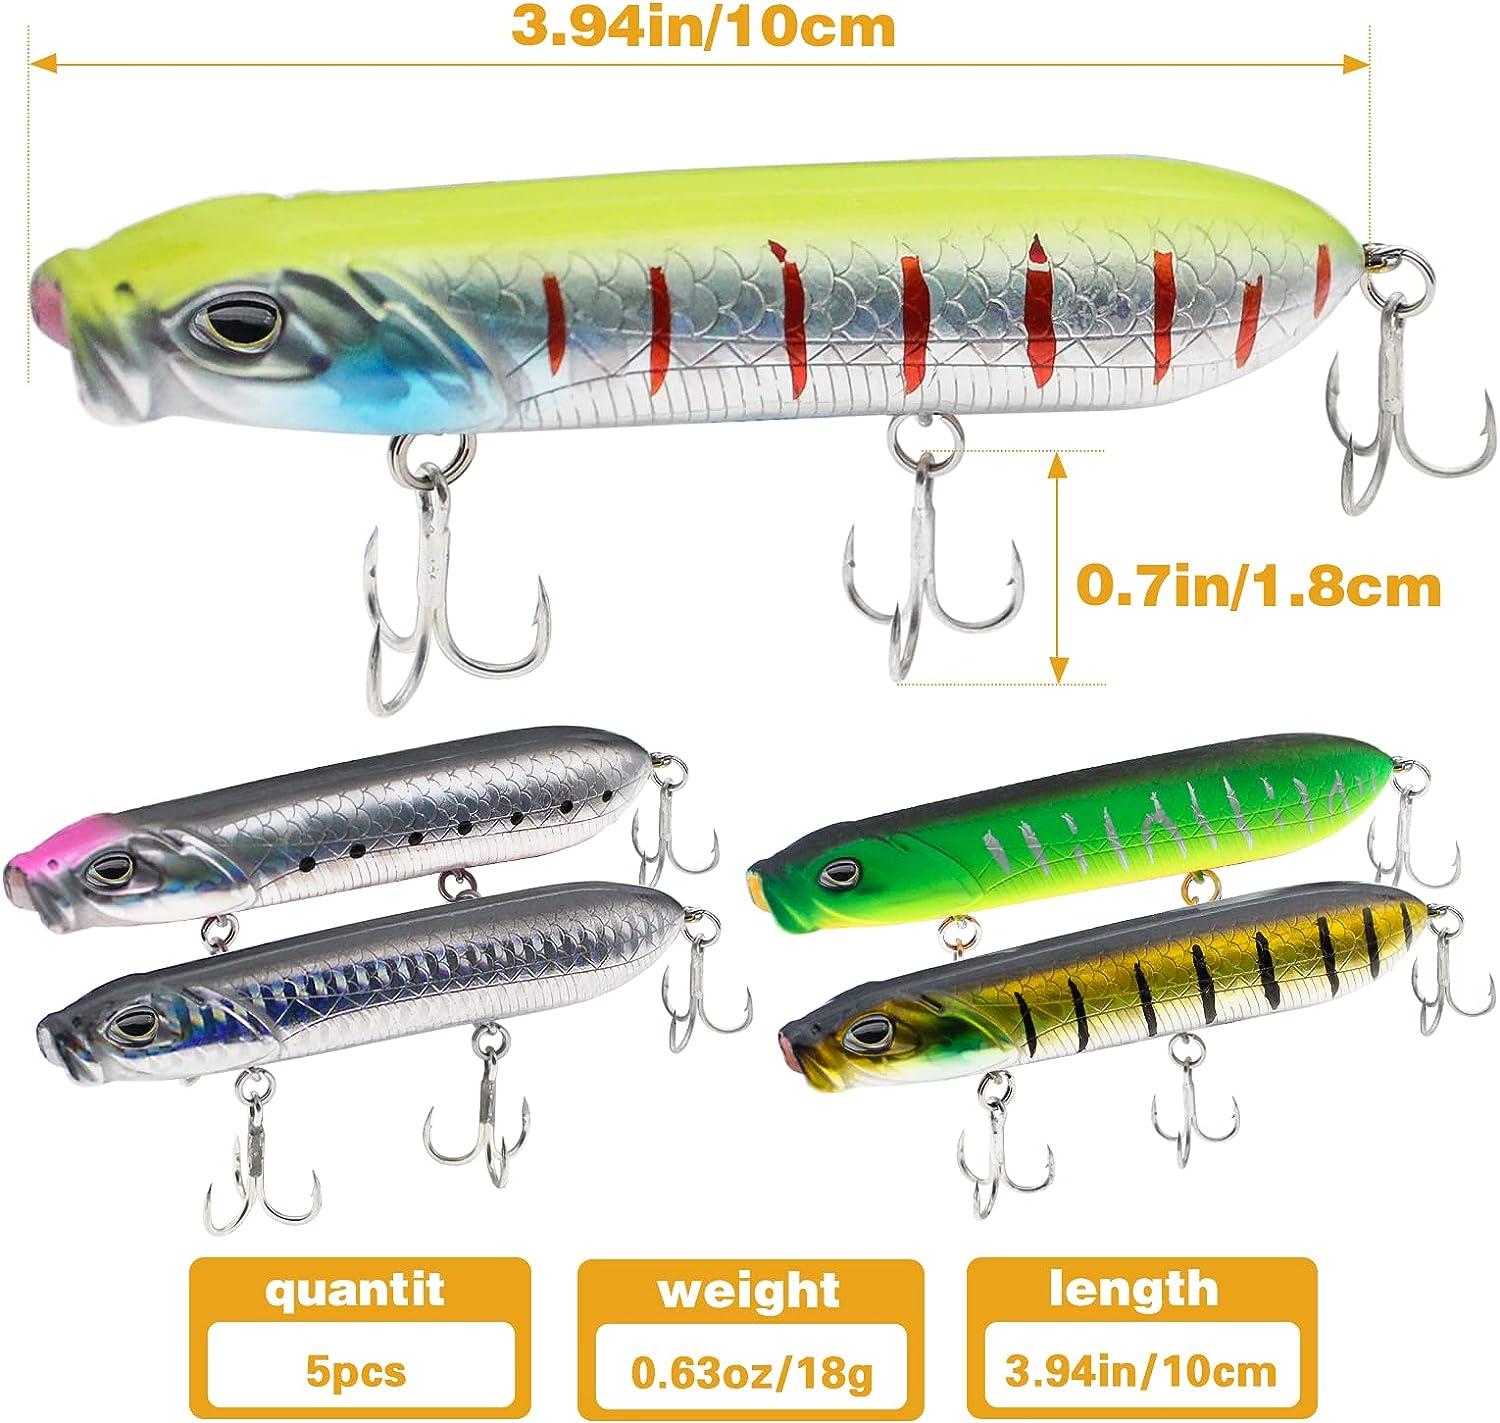 Topwater Fishing Bass Lures Floating Pencil Baits Artificial Hard Baits  Swimbait Lures with BBK-Hook for Bass Trout-Pike Pencil Popper Fishing Lure